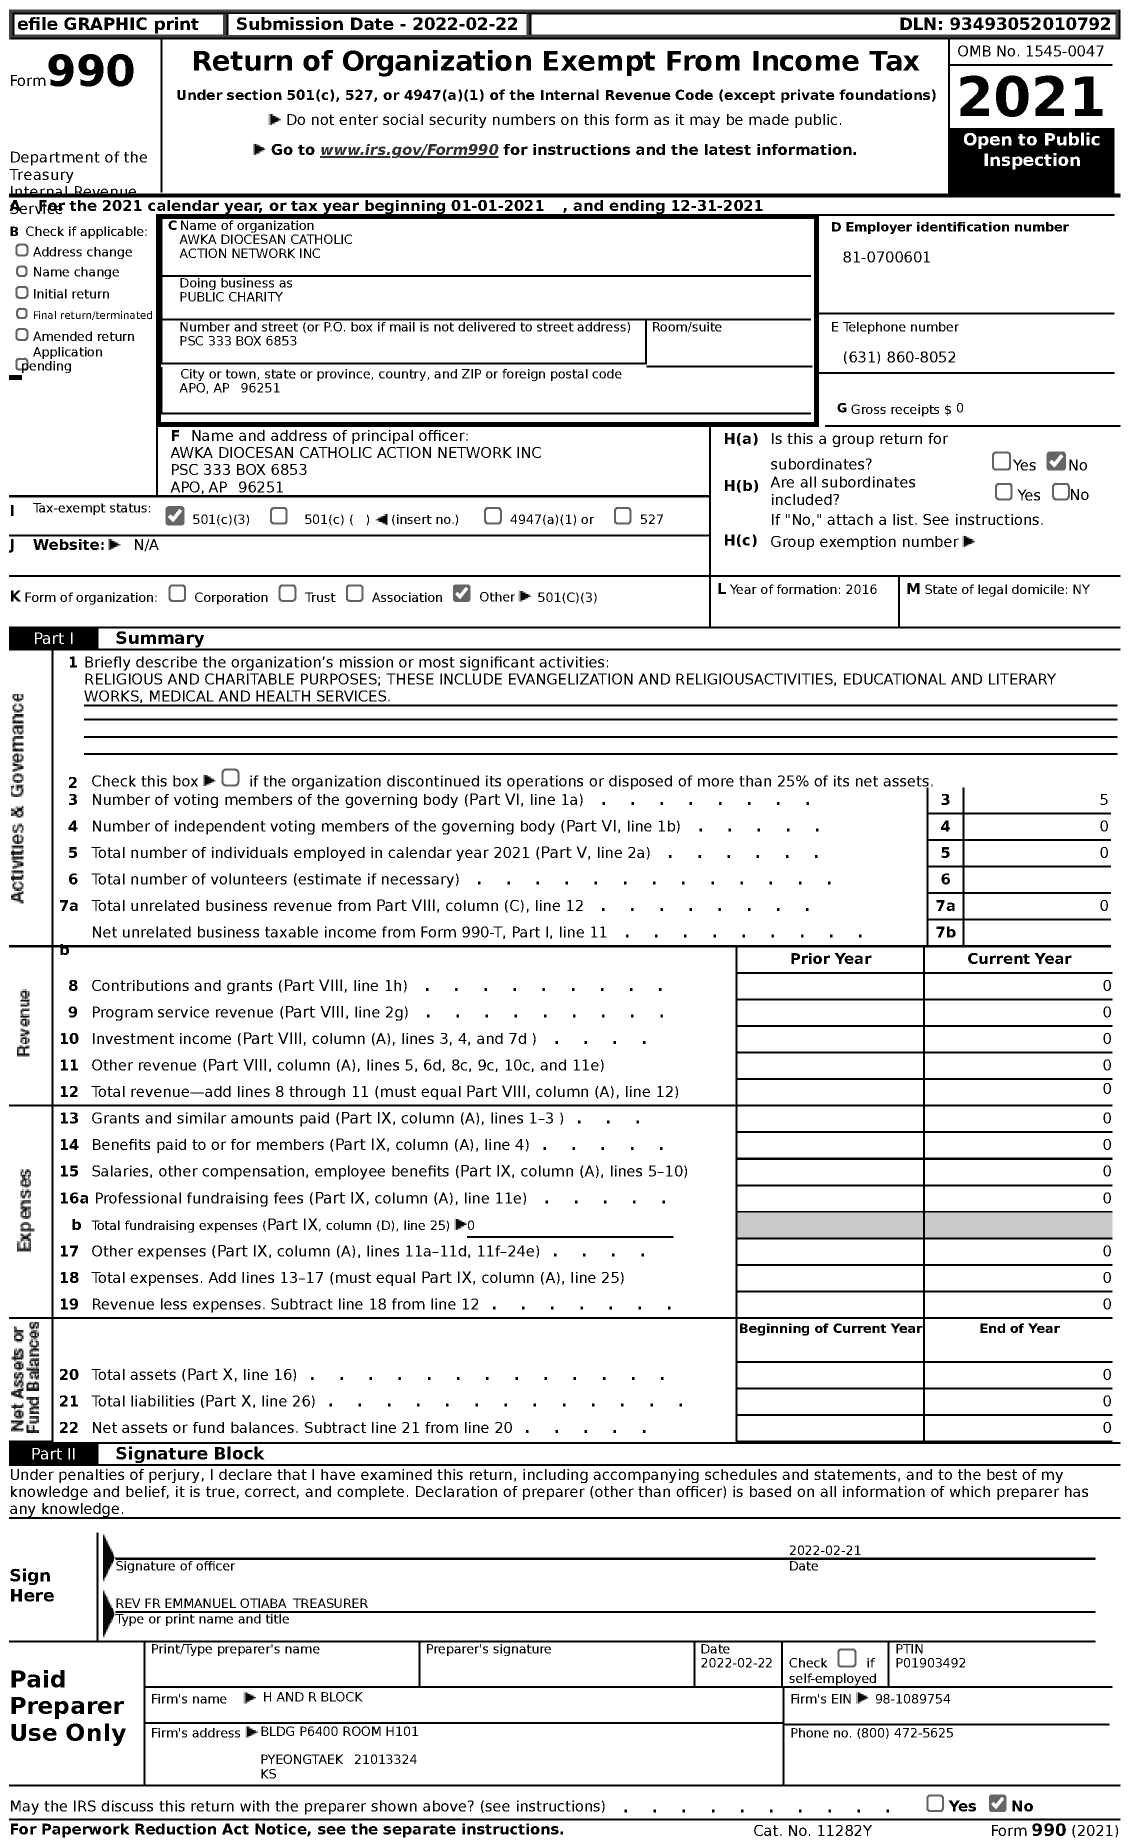 Image of first page of 2021 Form 990 for Public Charity / Awka Diocesan Catholic Action Network Inc